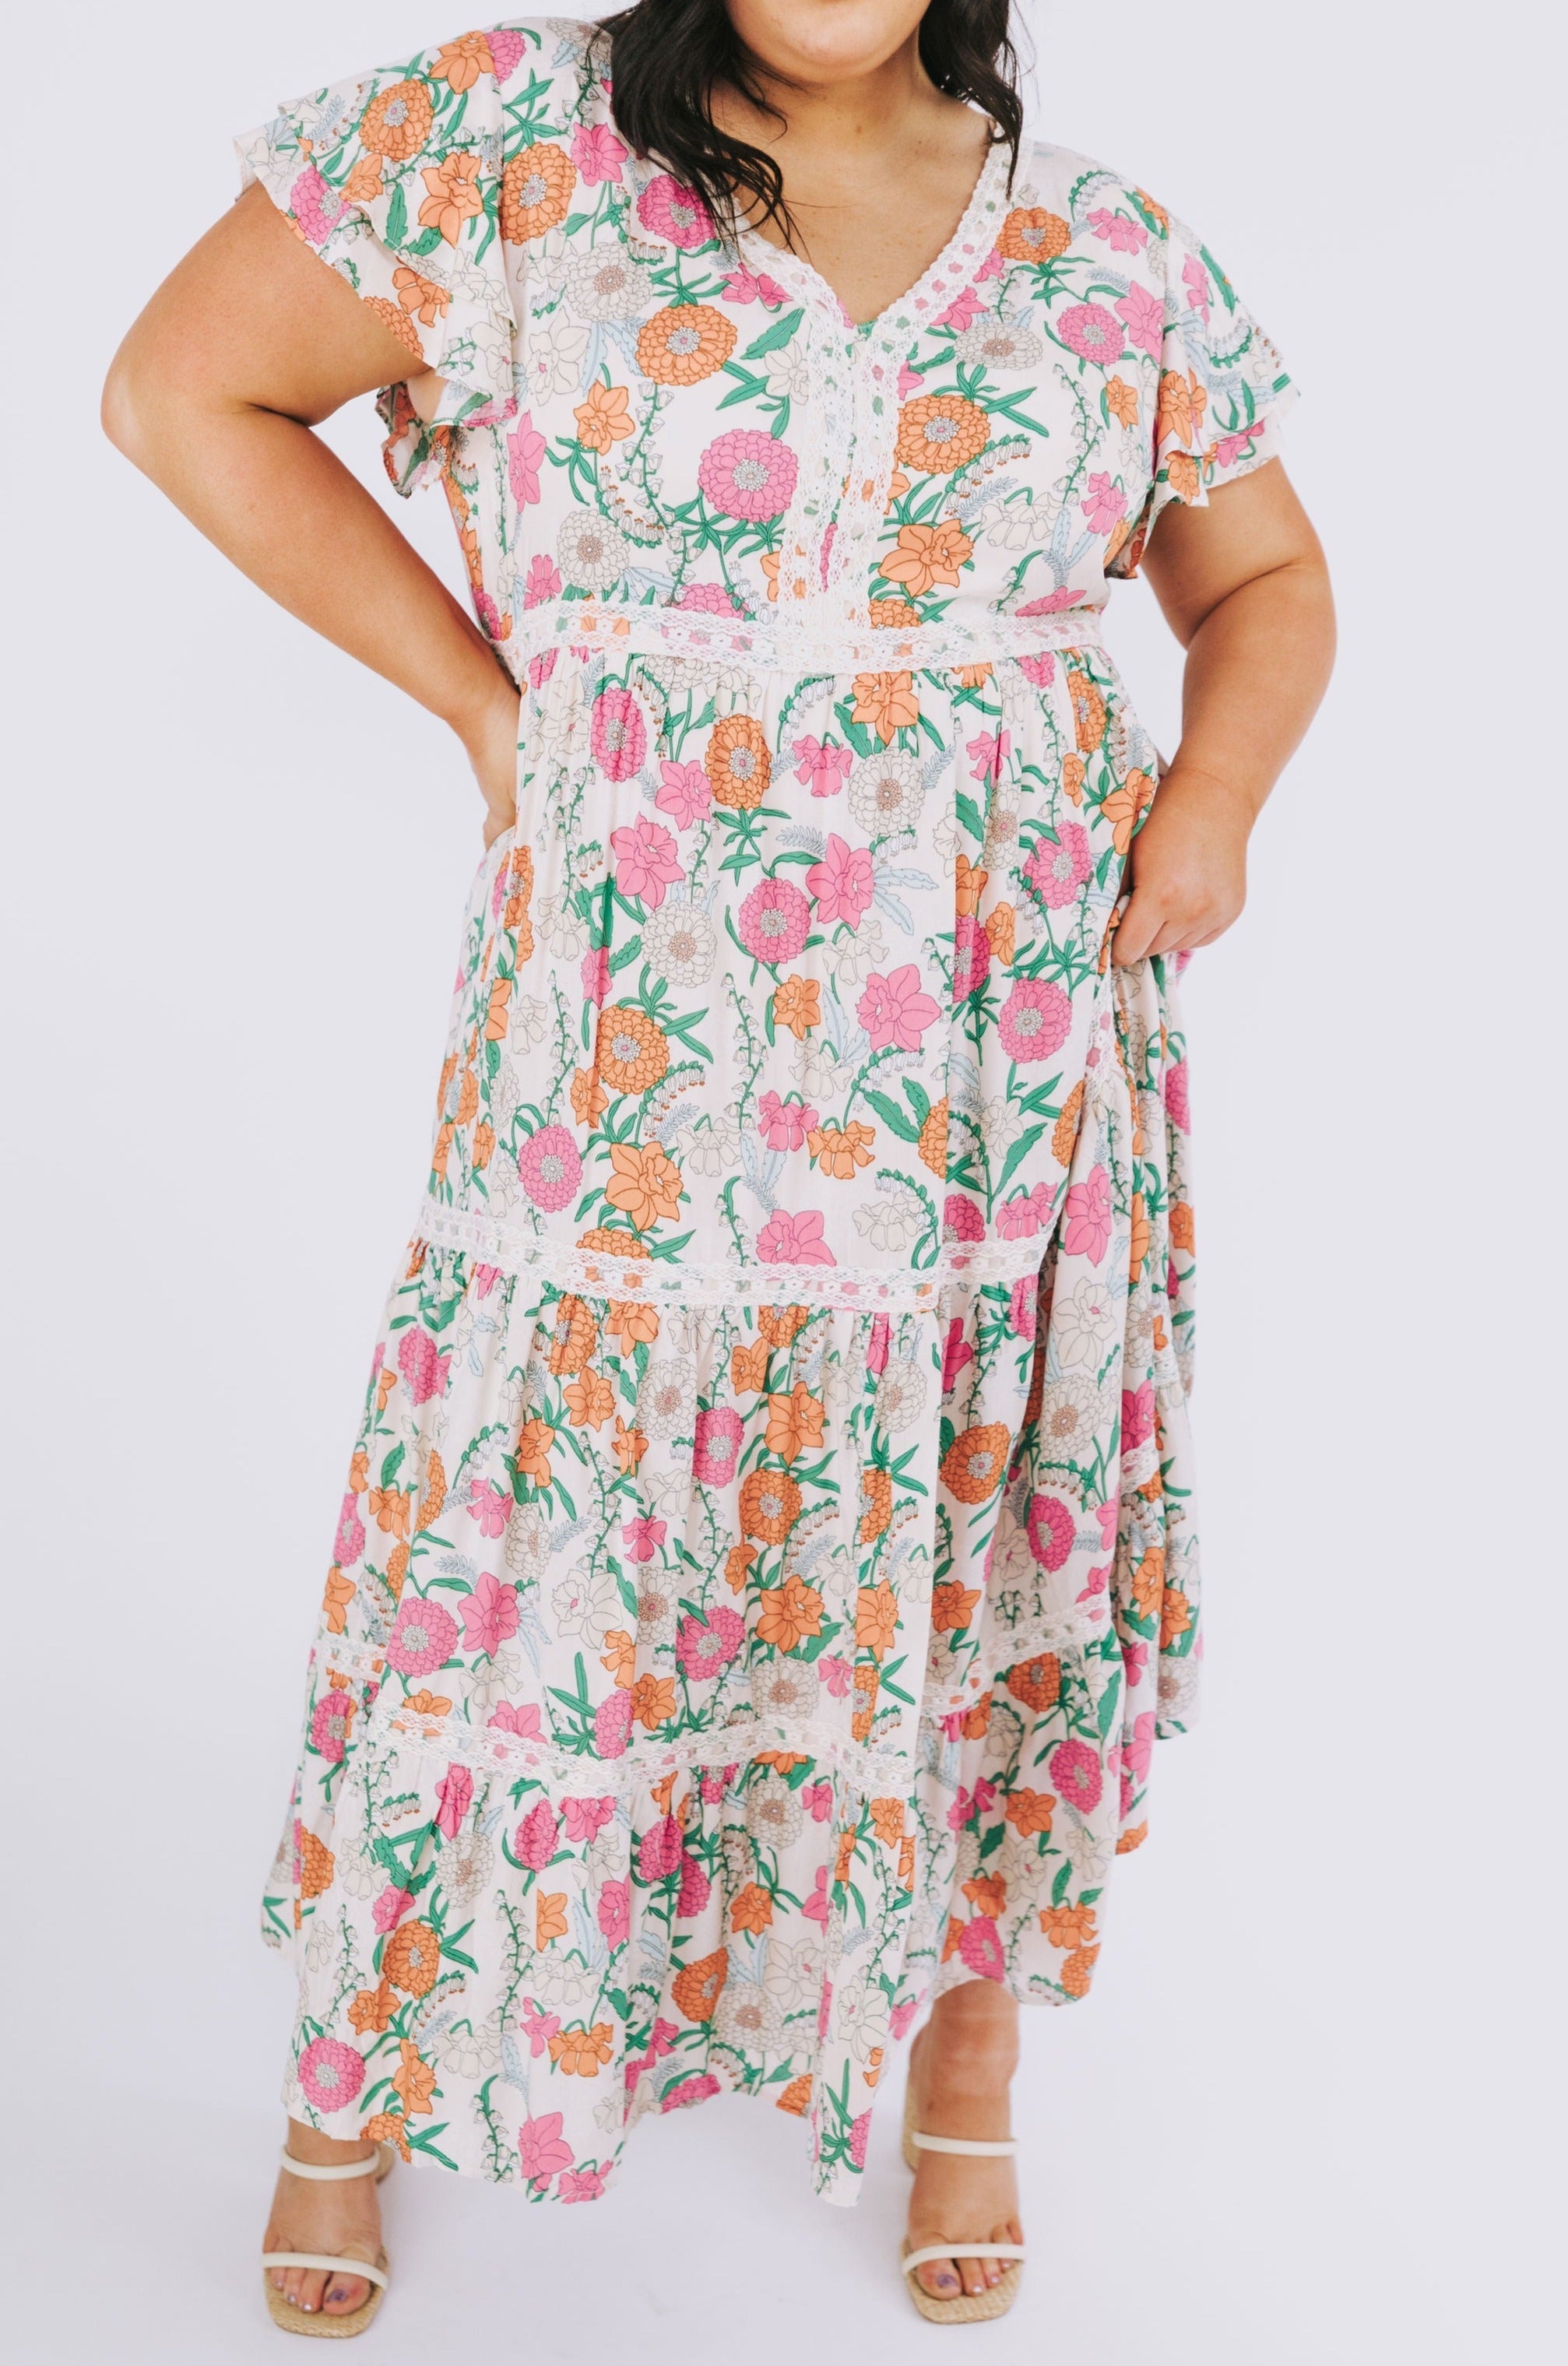 PLUS SIZE - Music To My Ears Dress - New Color!